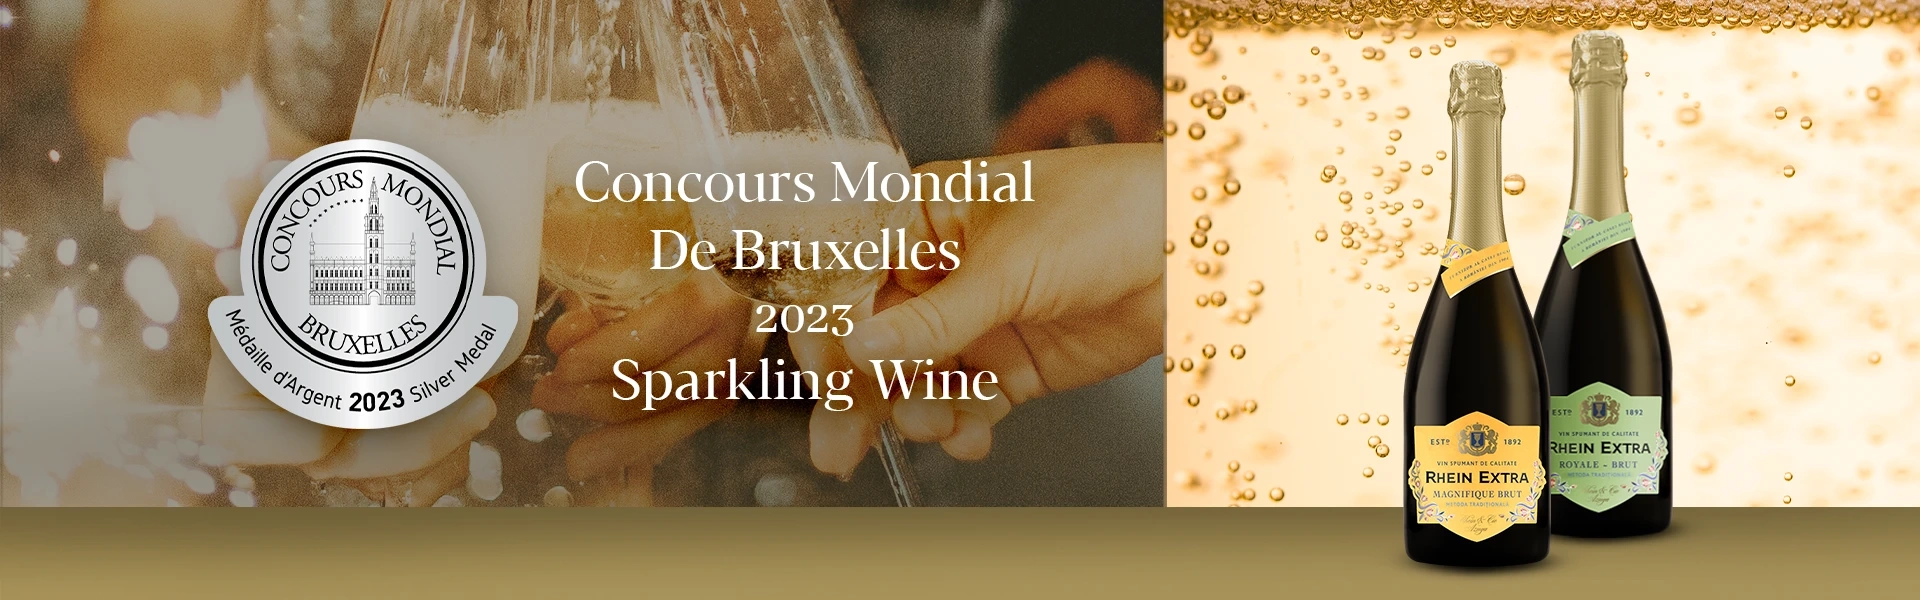 New medals for the wines from our portfolio at the Concours Mondial de Bruxelles 2023!